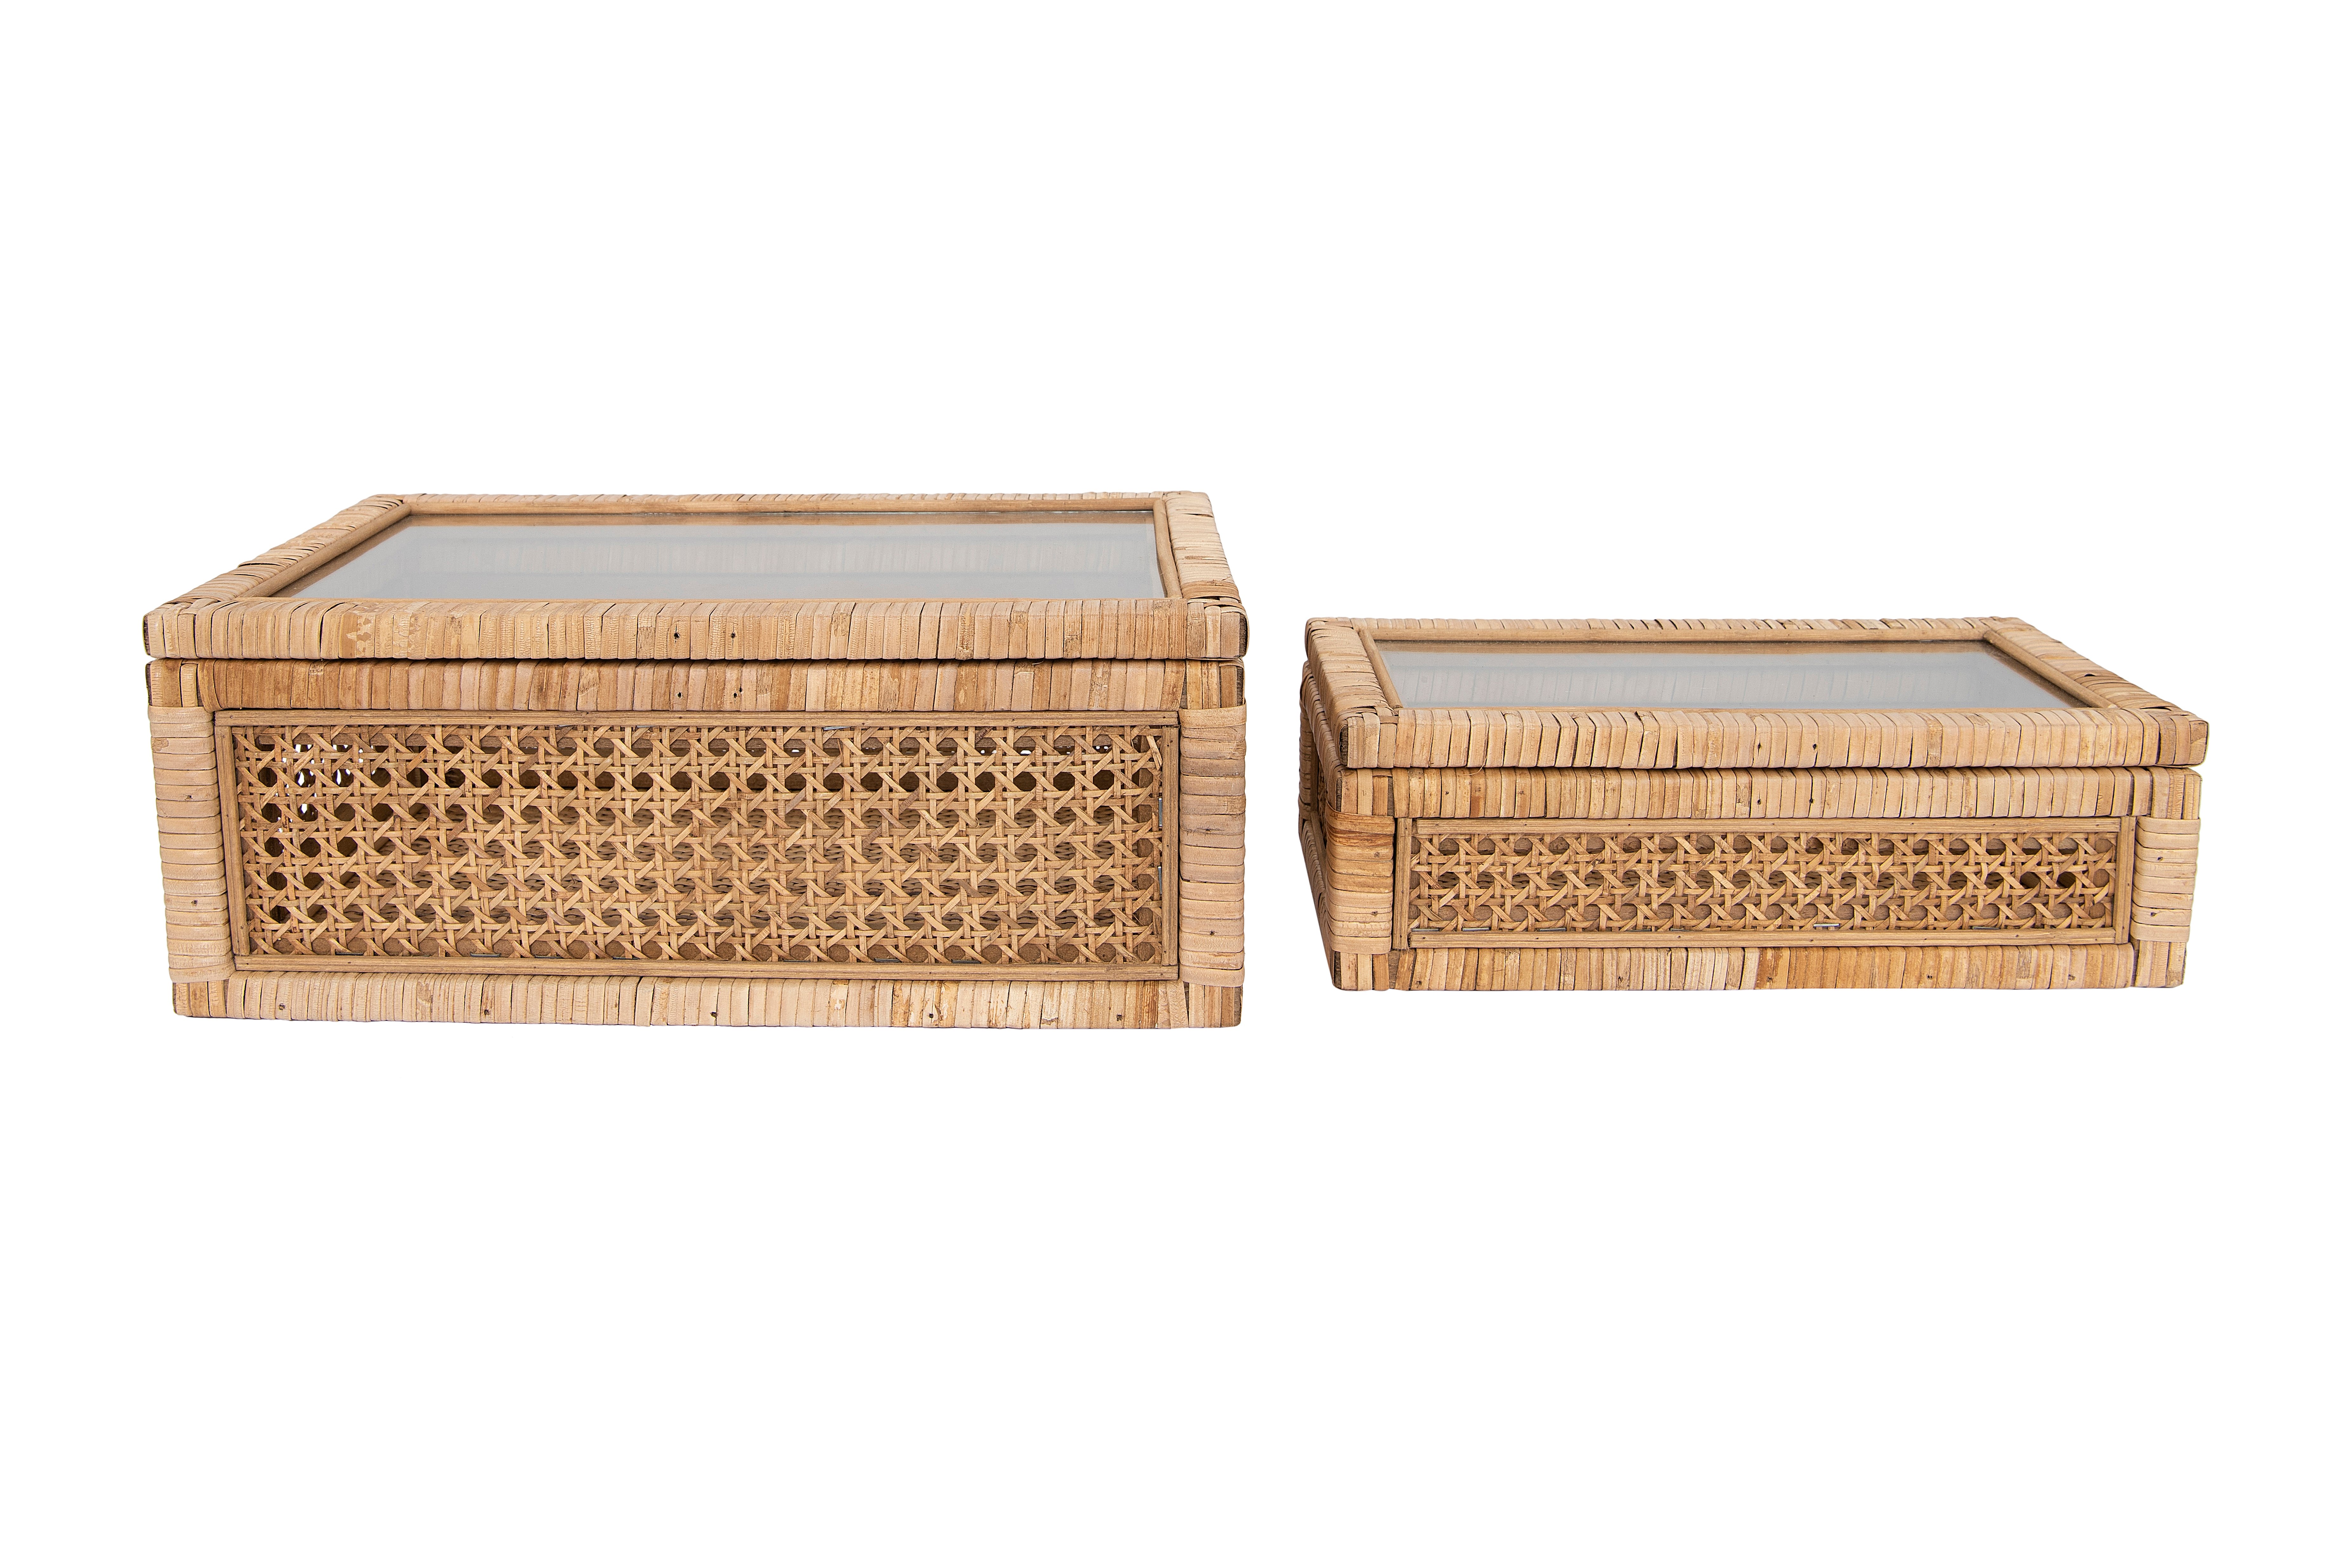 Woven Rattan Display Boxes with Glass Lids & Fir Wood Frame (Set of 2 Sizes) - Nomad Home